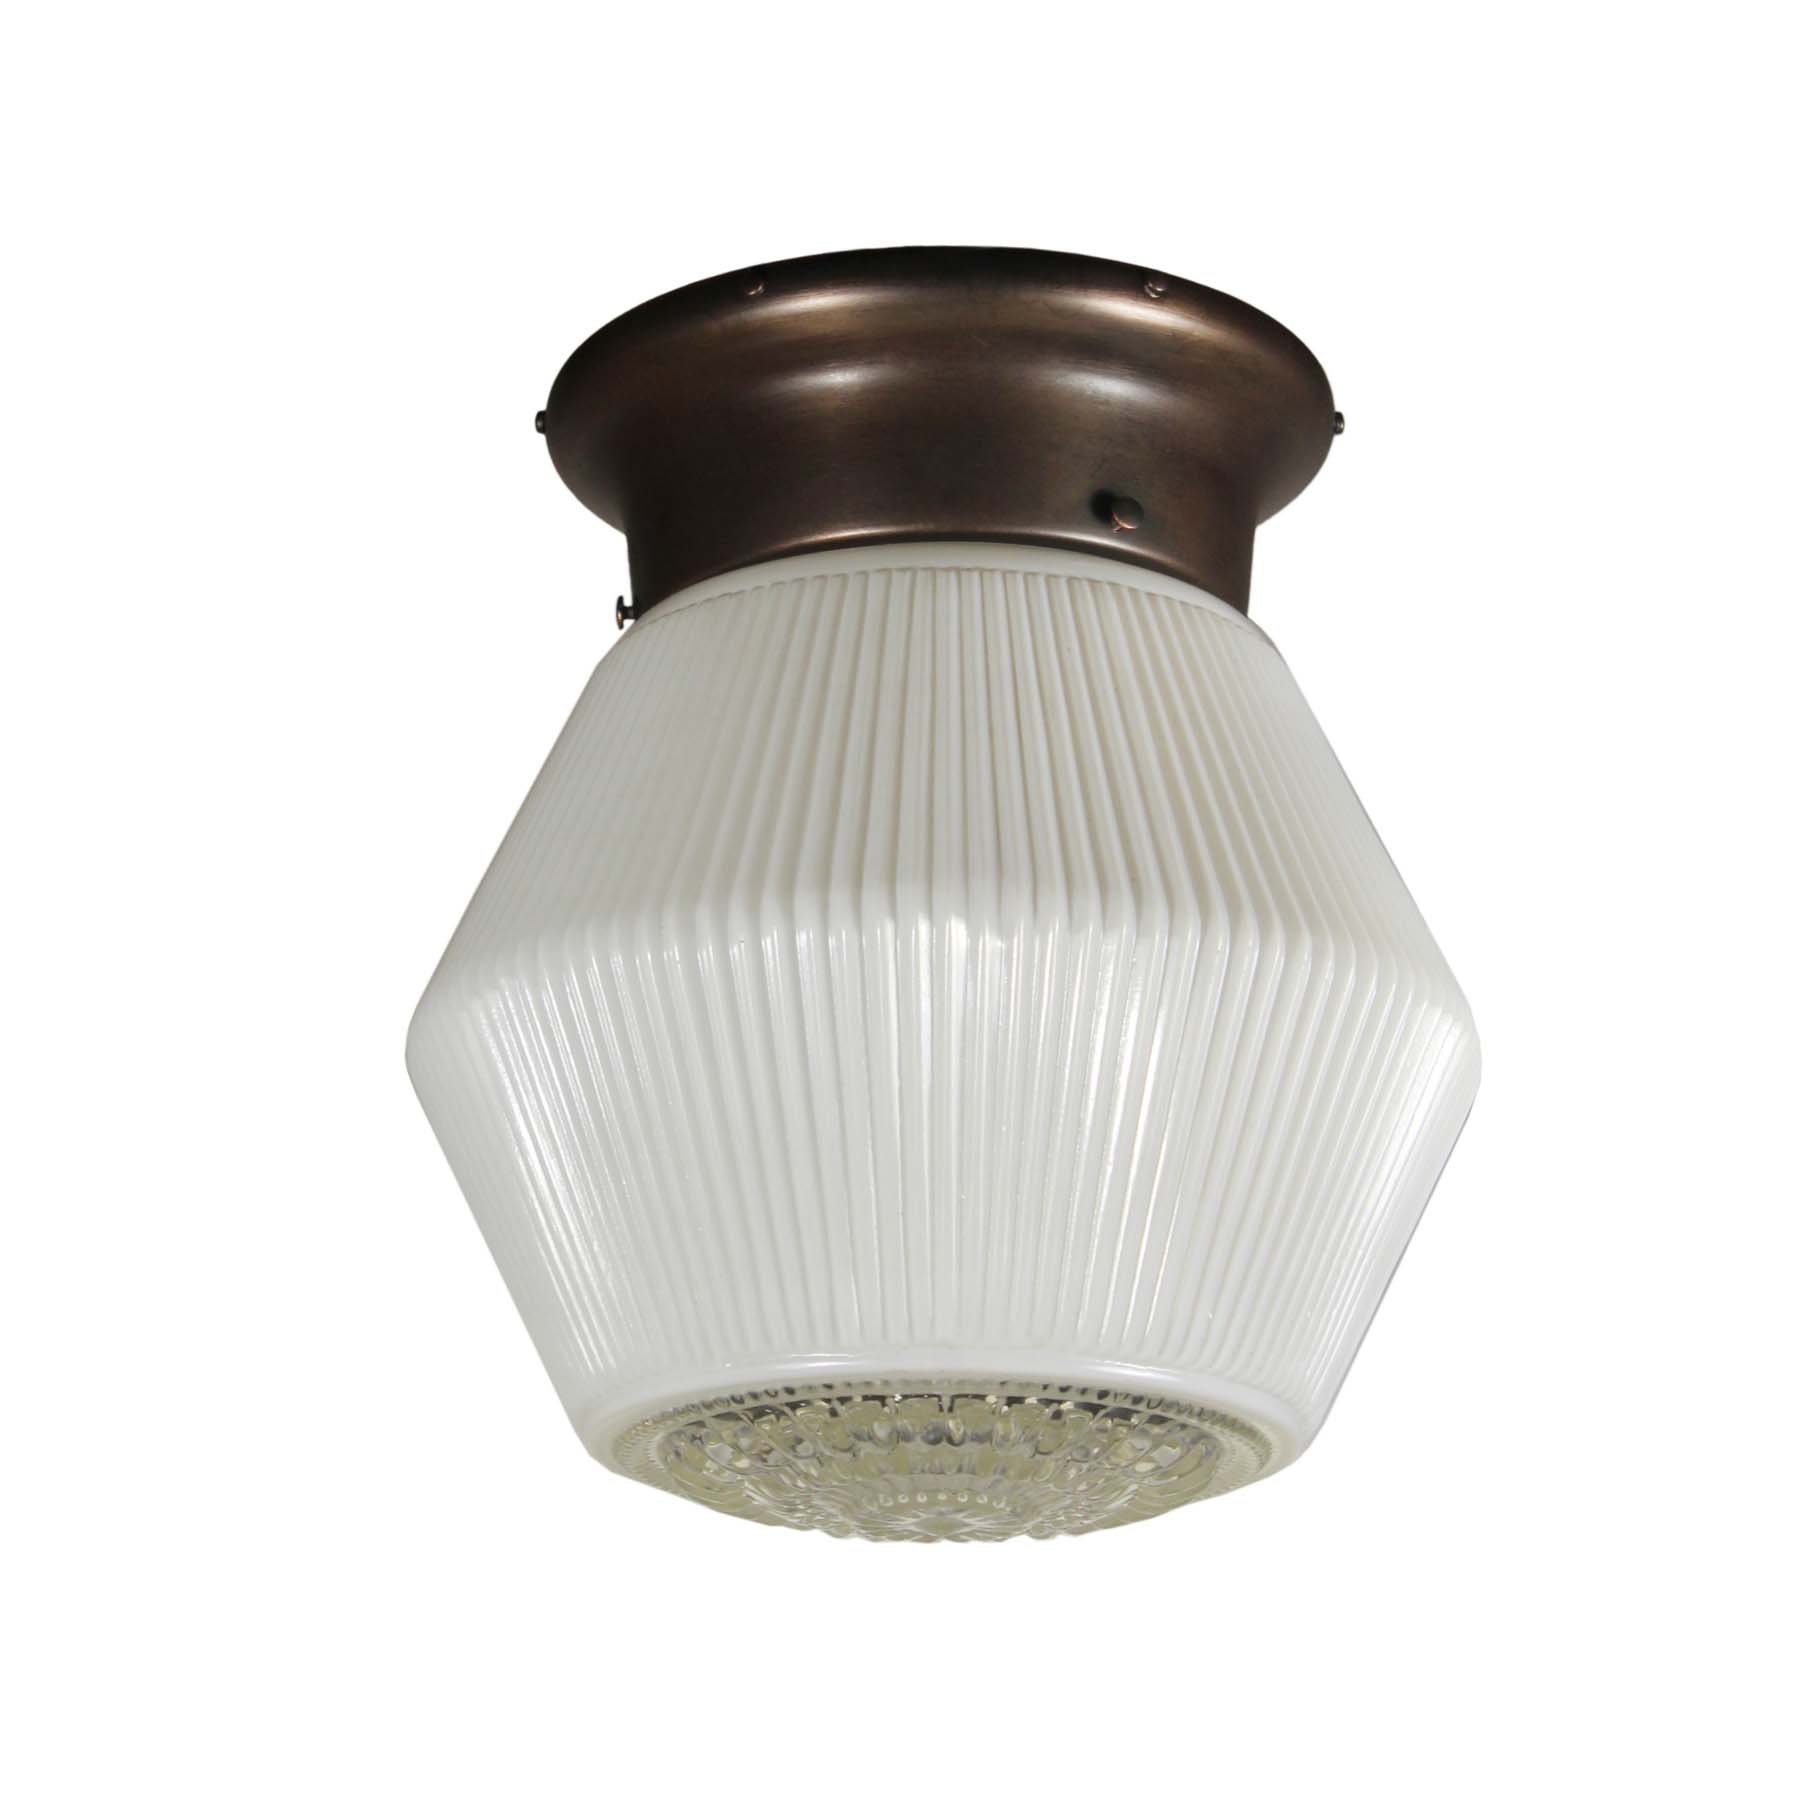 SOLD Flush Mount Light with Glass Shade, Antique Lighting-67774